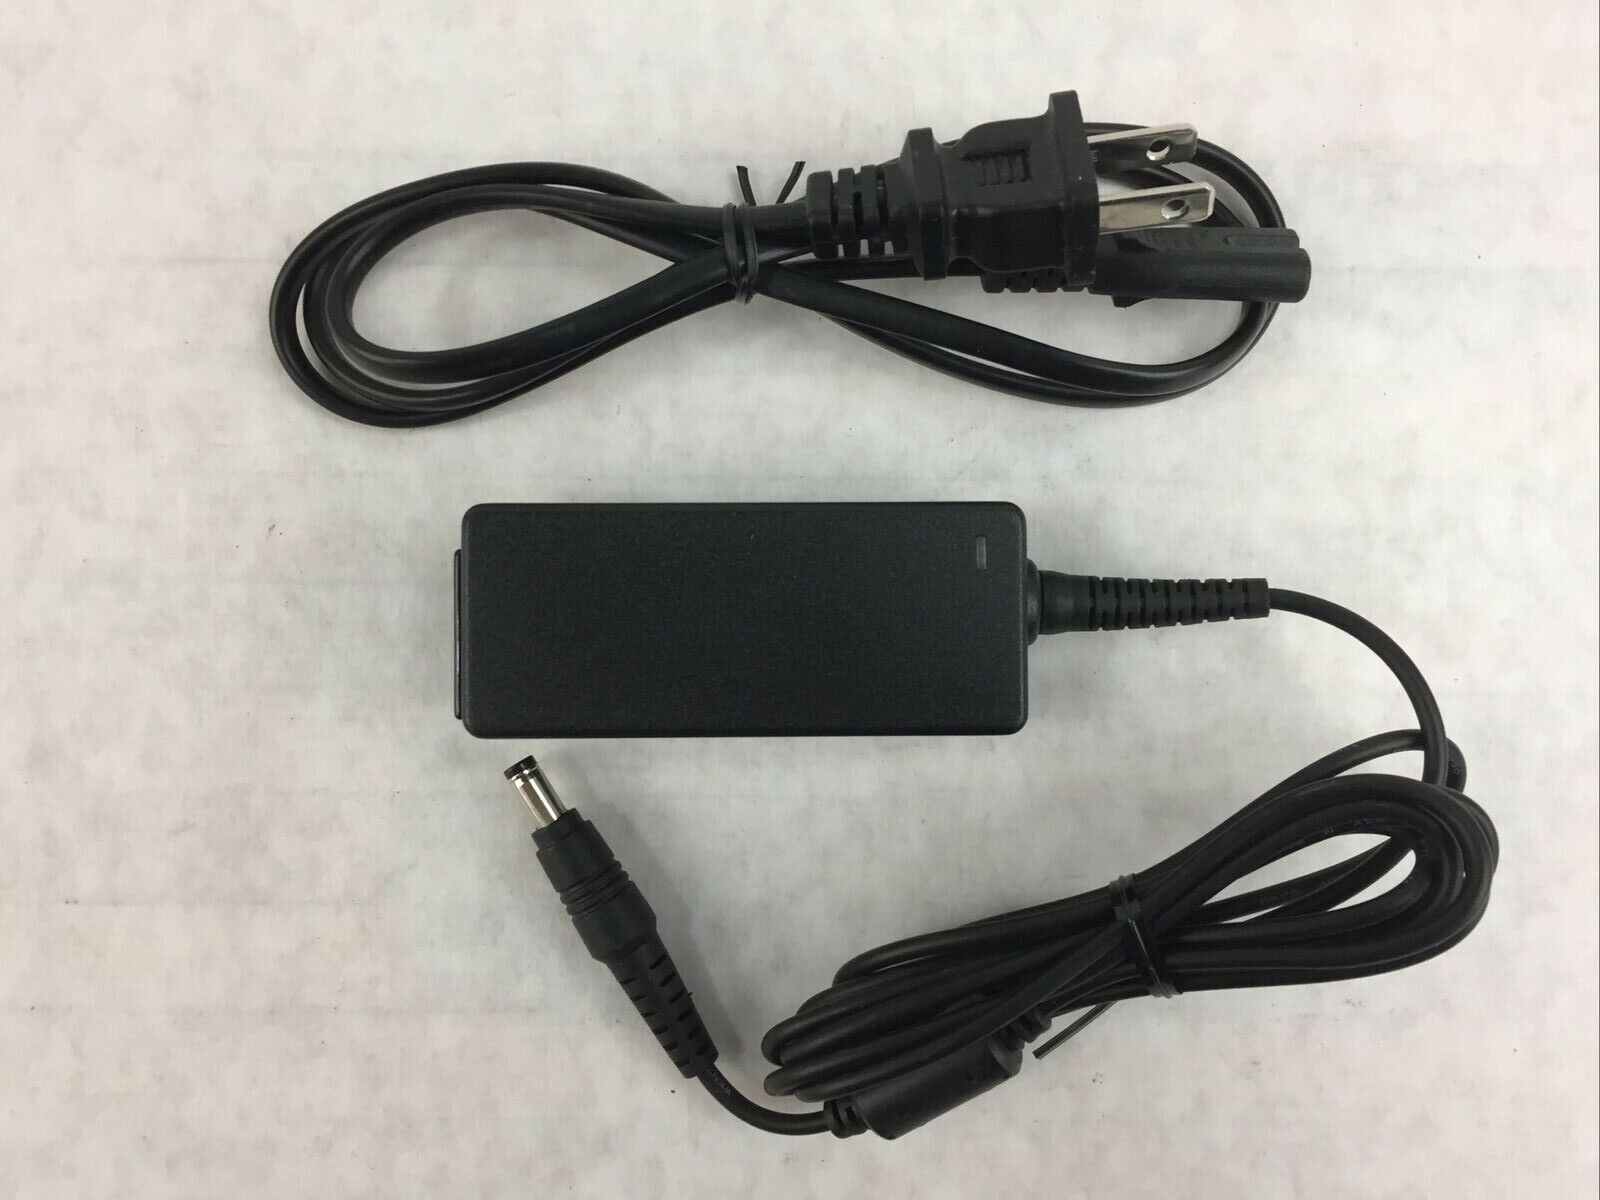 Delta Electronics ADP-36PH Power Supply Adapter 12V 3.0A with Power Cord